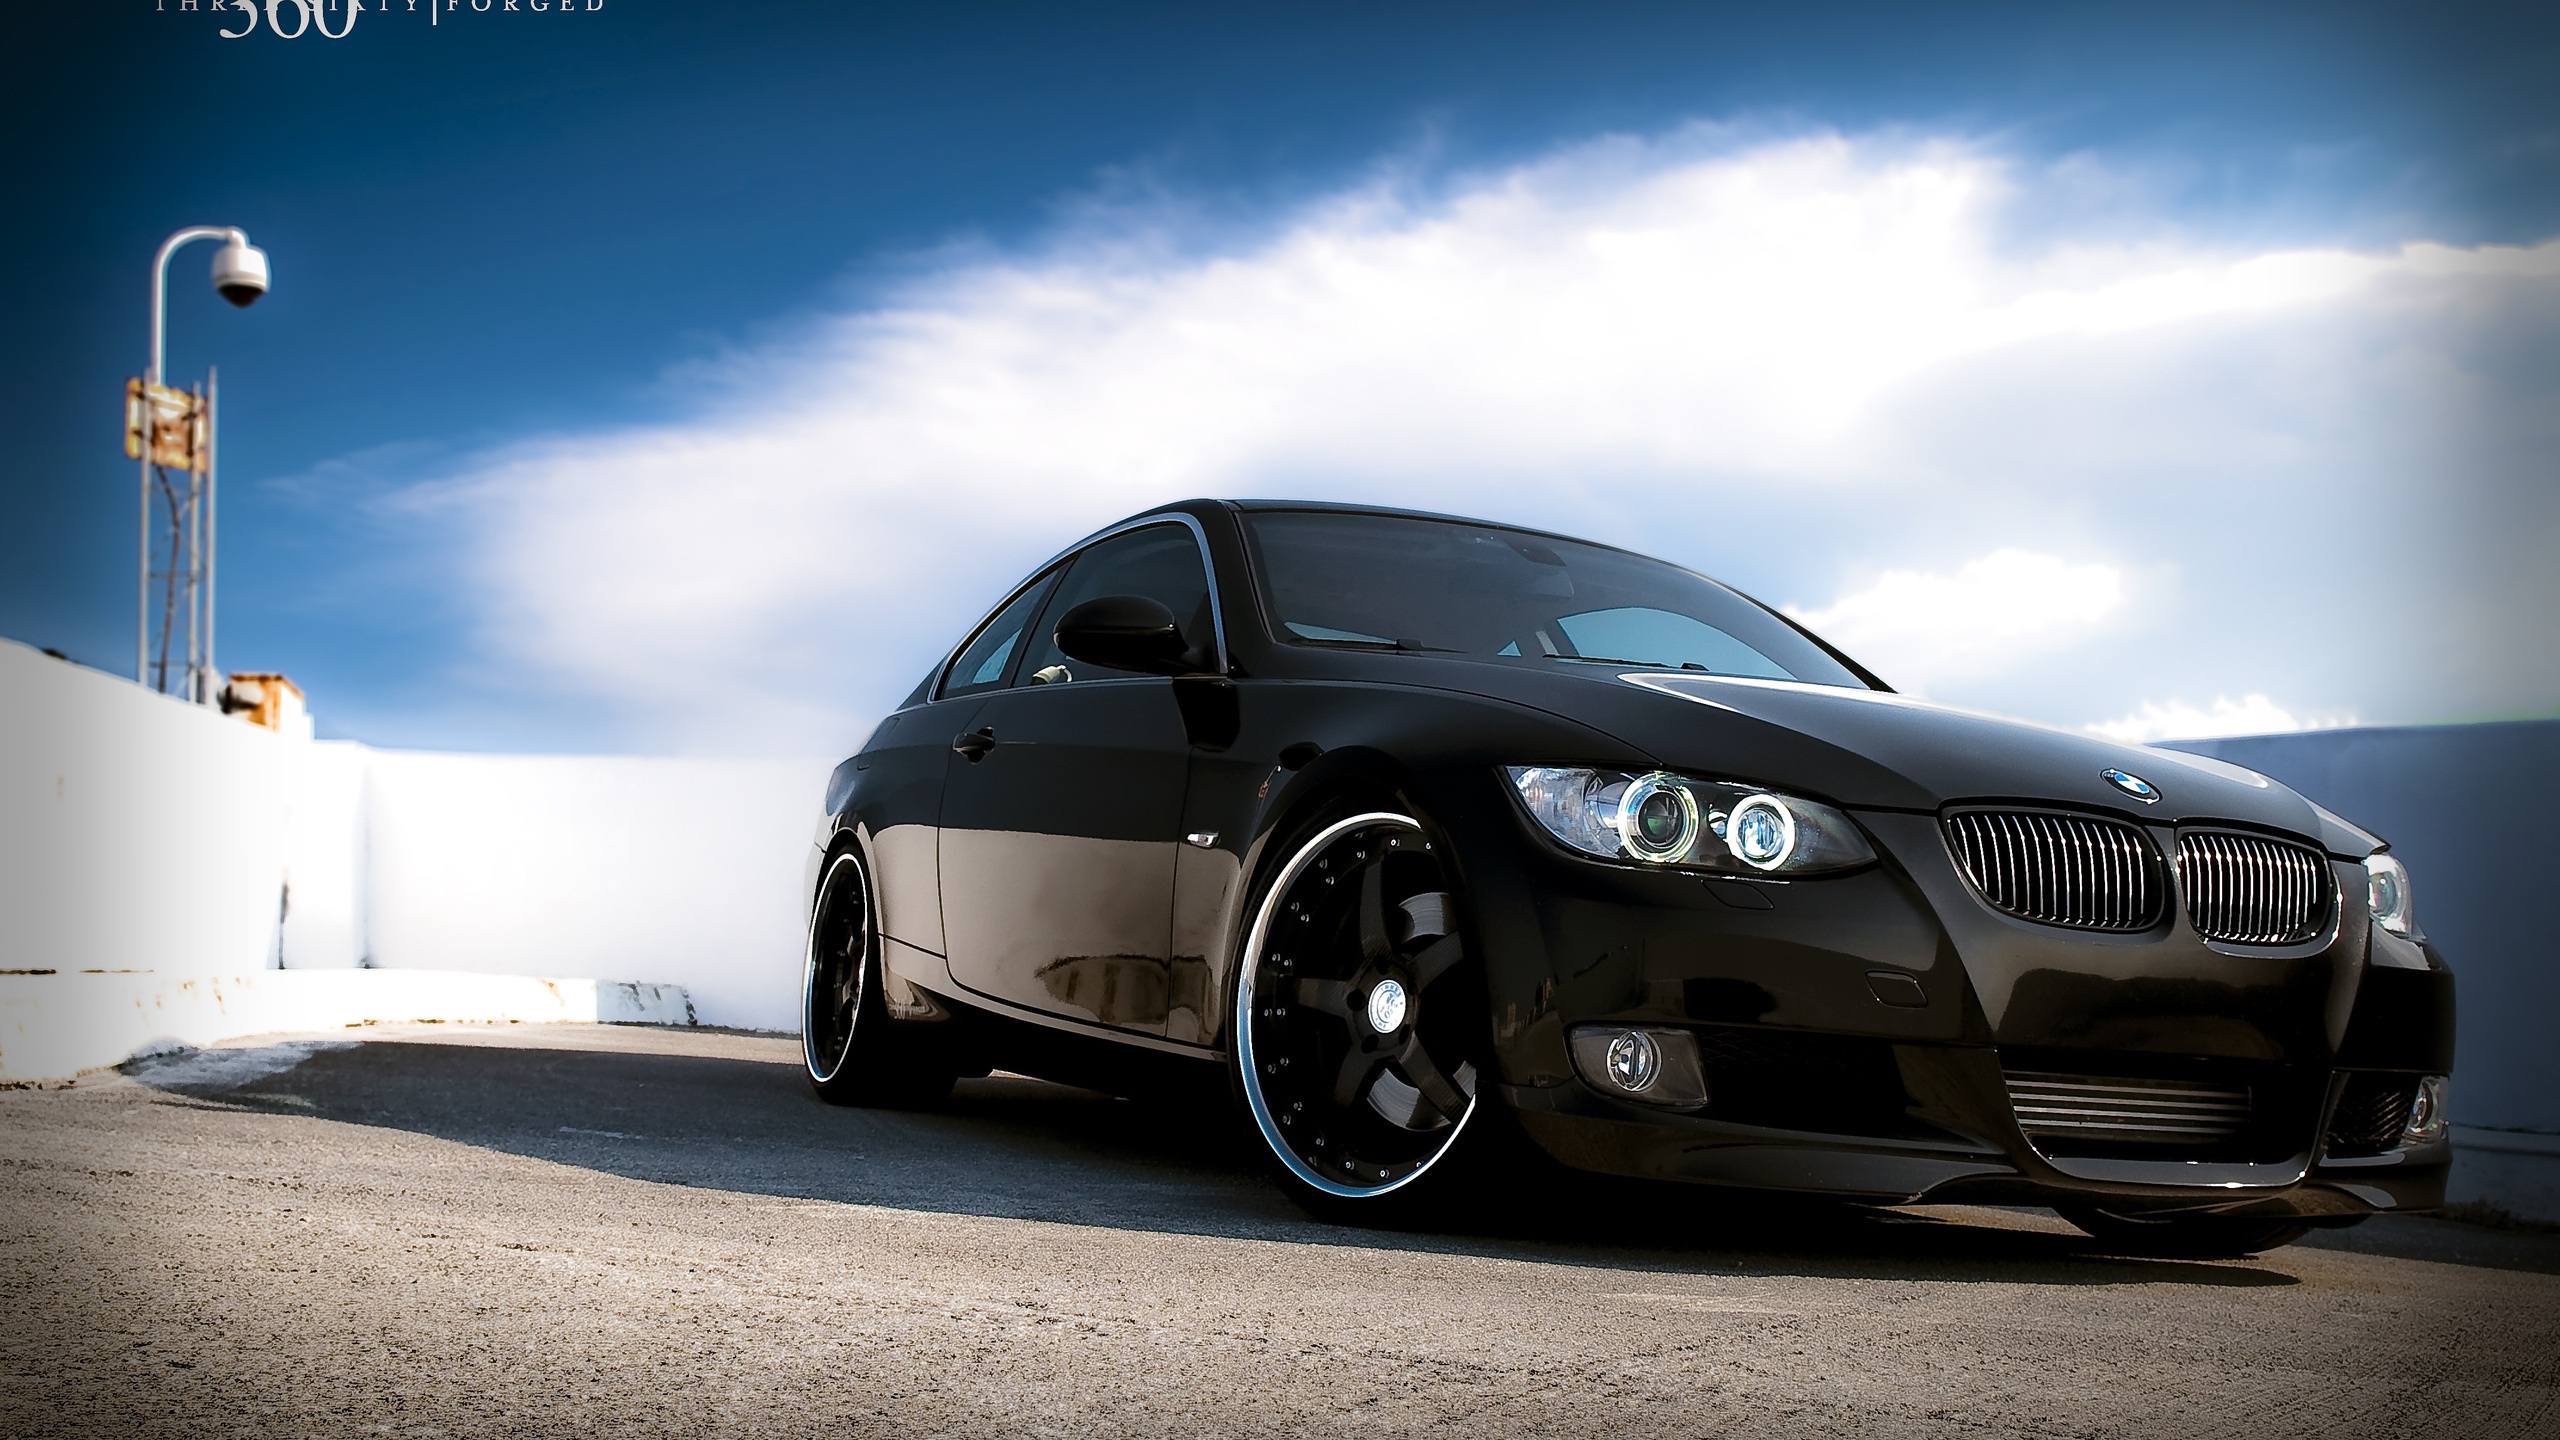 Bmw, cars, 2560x1440 HD Wallpaper and FREE Stock Photo